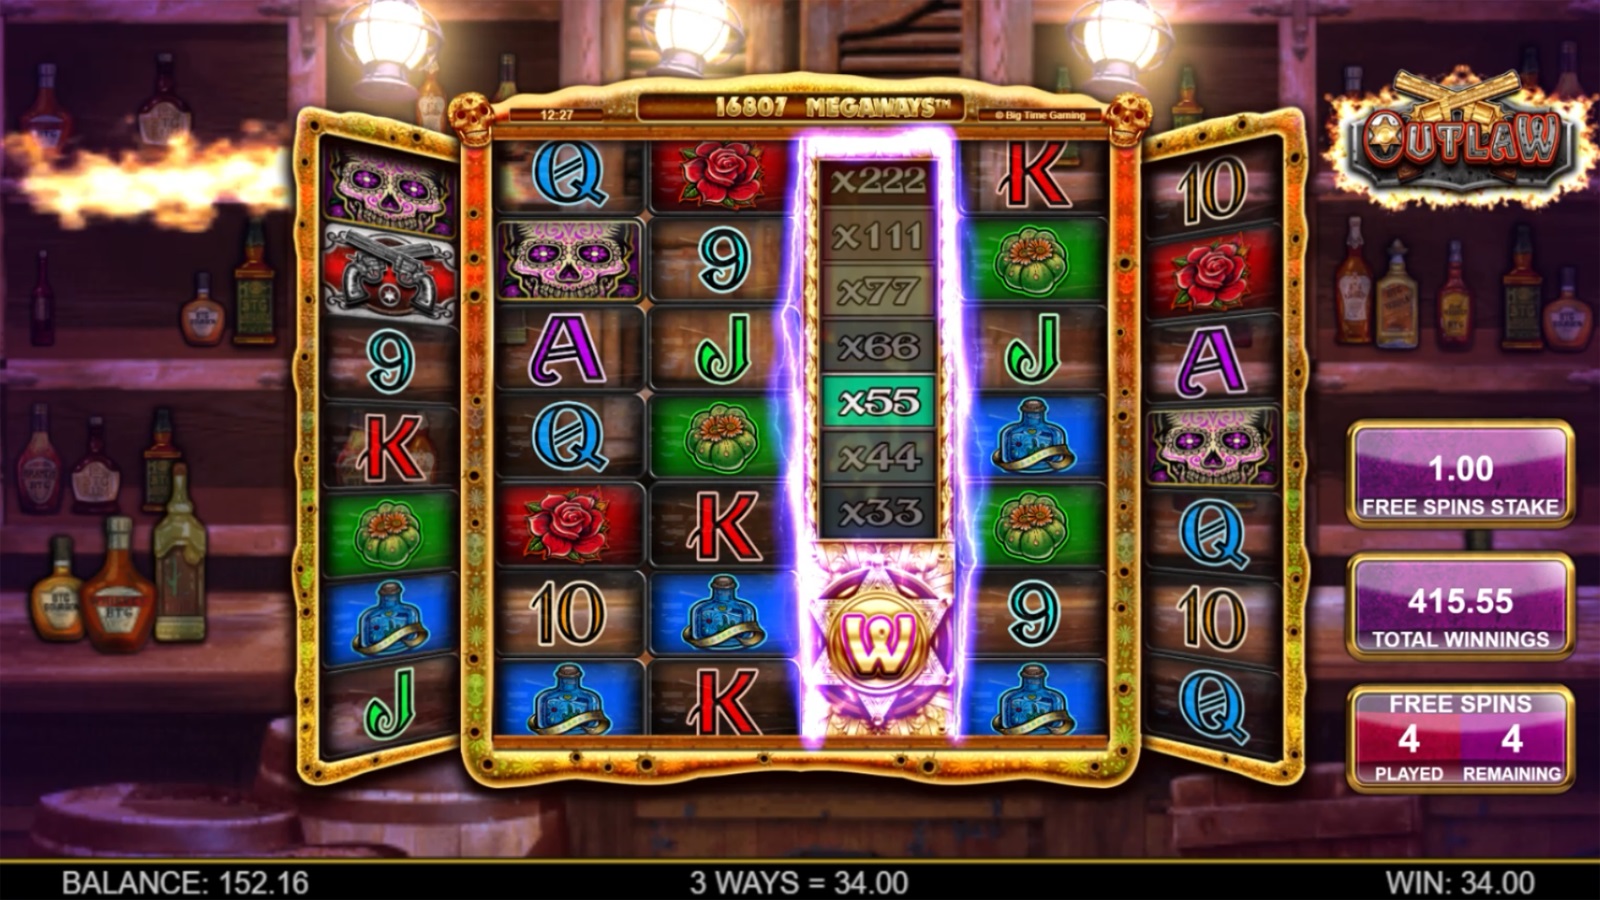 Outlaw, Enhanced Dizzy in the Head Free Spins